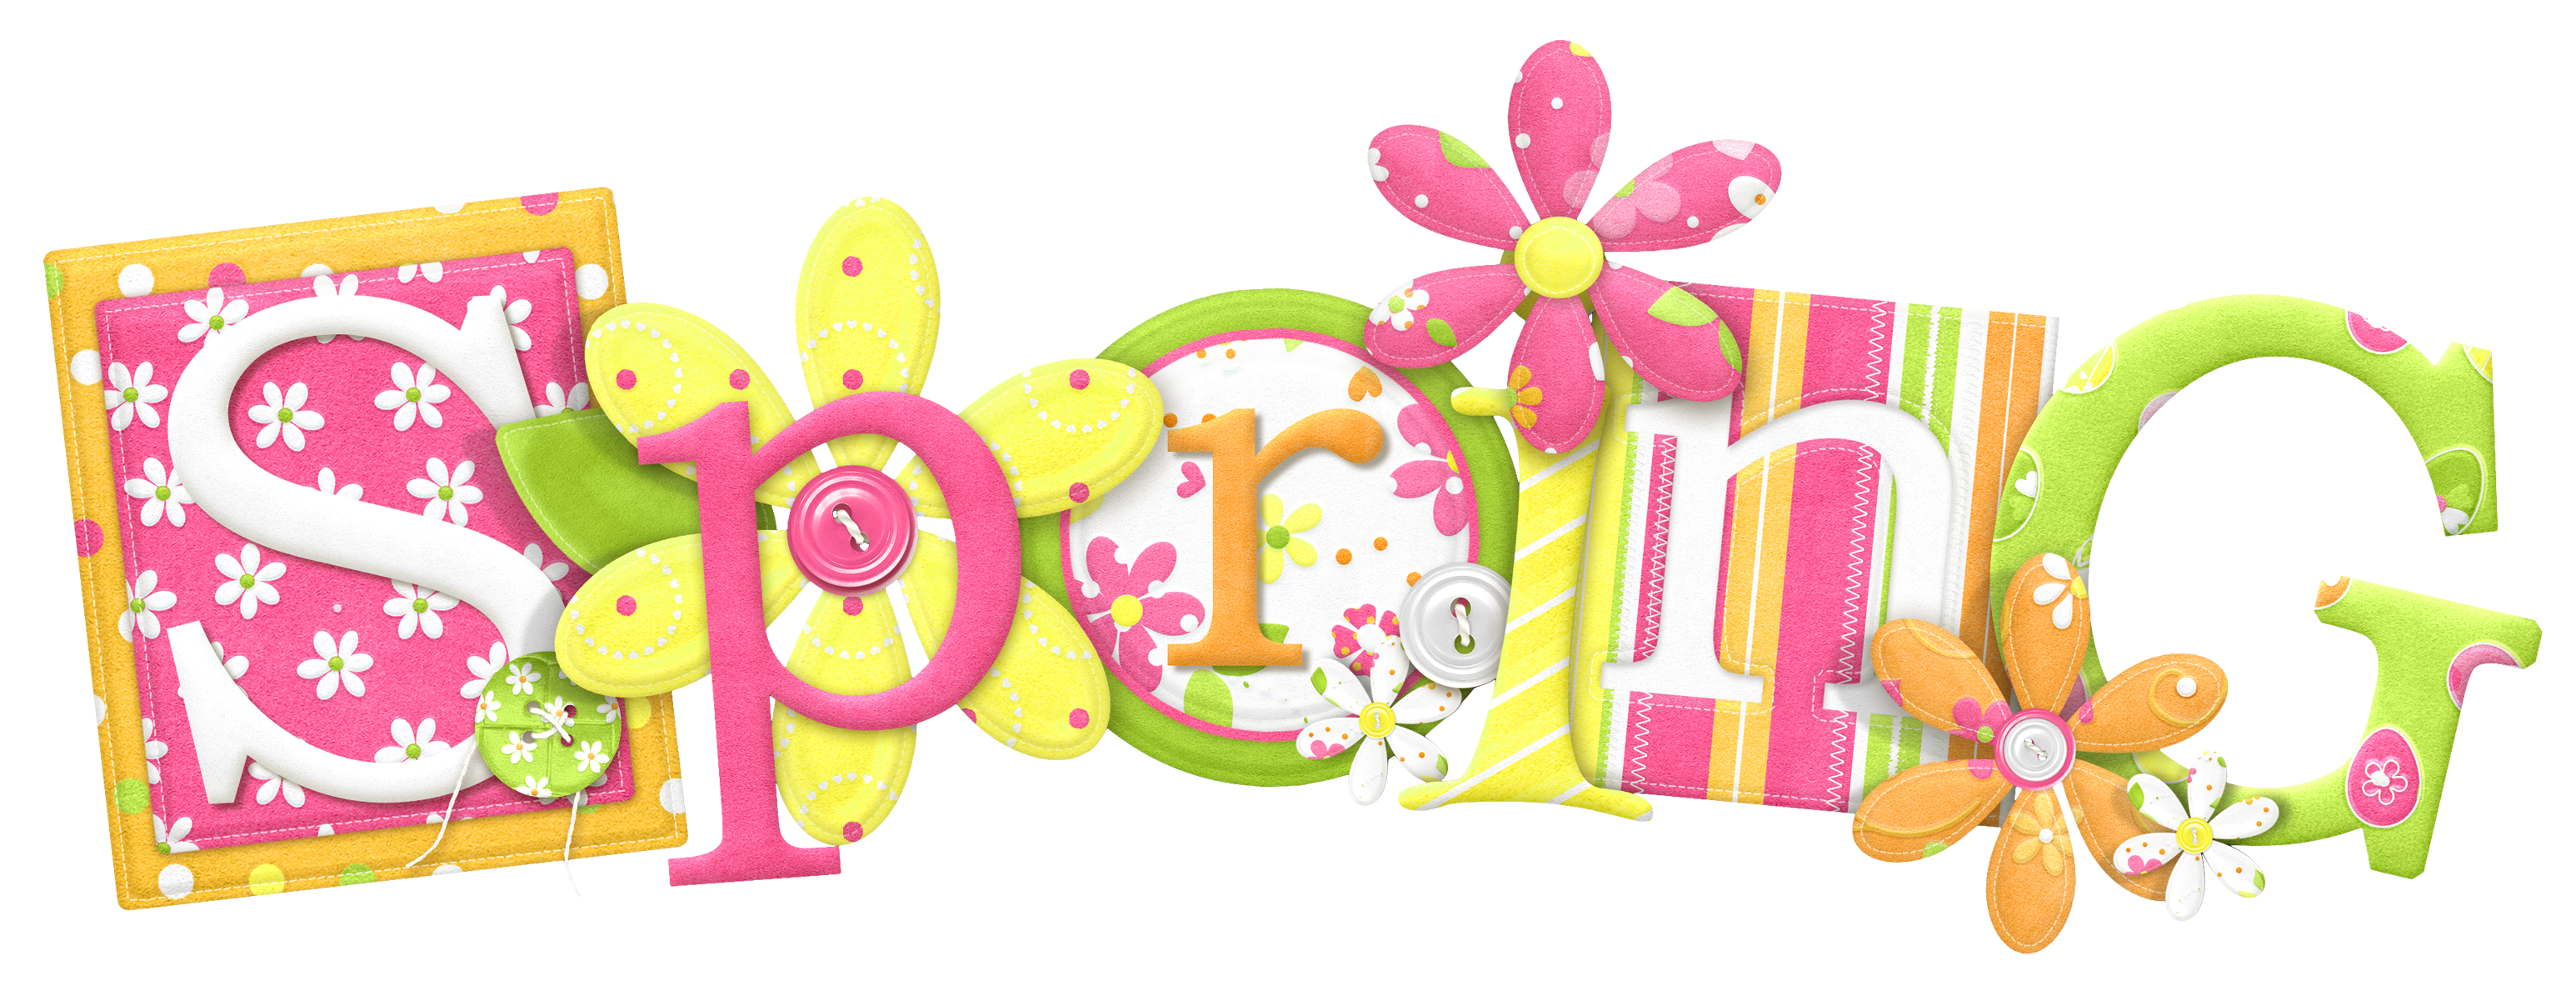 spring graphics clipart - photo #33